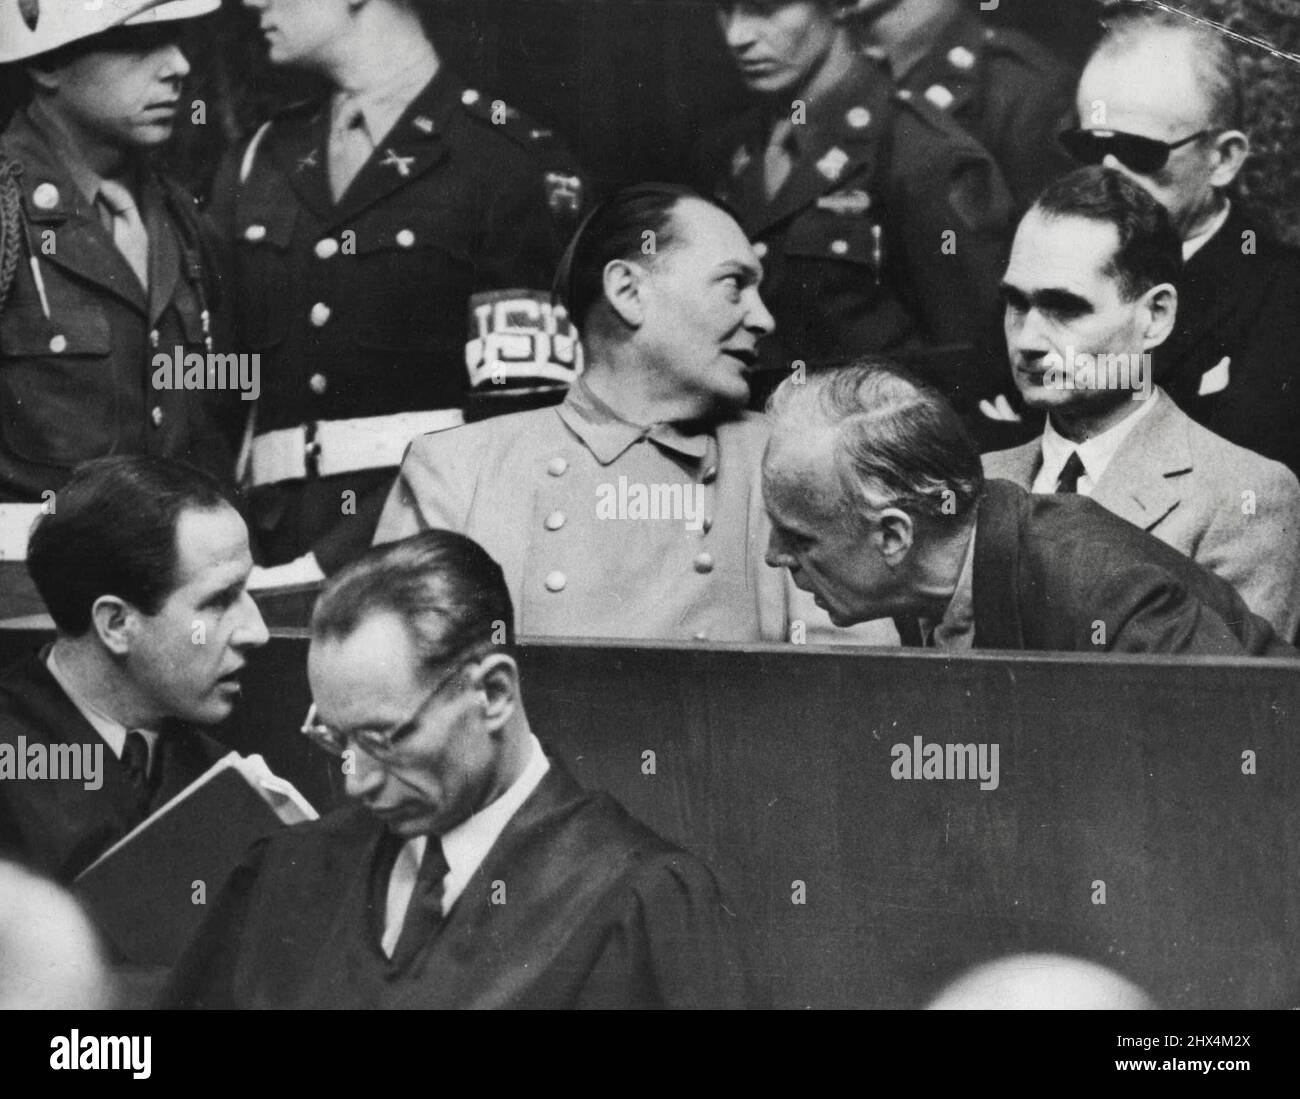 Nazi war criminals whisper in the dock at Nuremberg. Joachim von Ribbentrop leans in front of Rudolf Hess to confer with his lawyer (lower left), whille Hermann Goring (centre), turns to speak to Karl Dontiz (rear right). The trial still drags on. April 18, 1946. (Photo by Associated Press Photo). Stock Photo